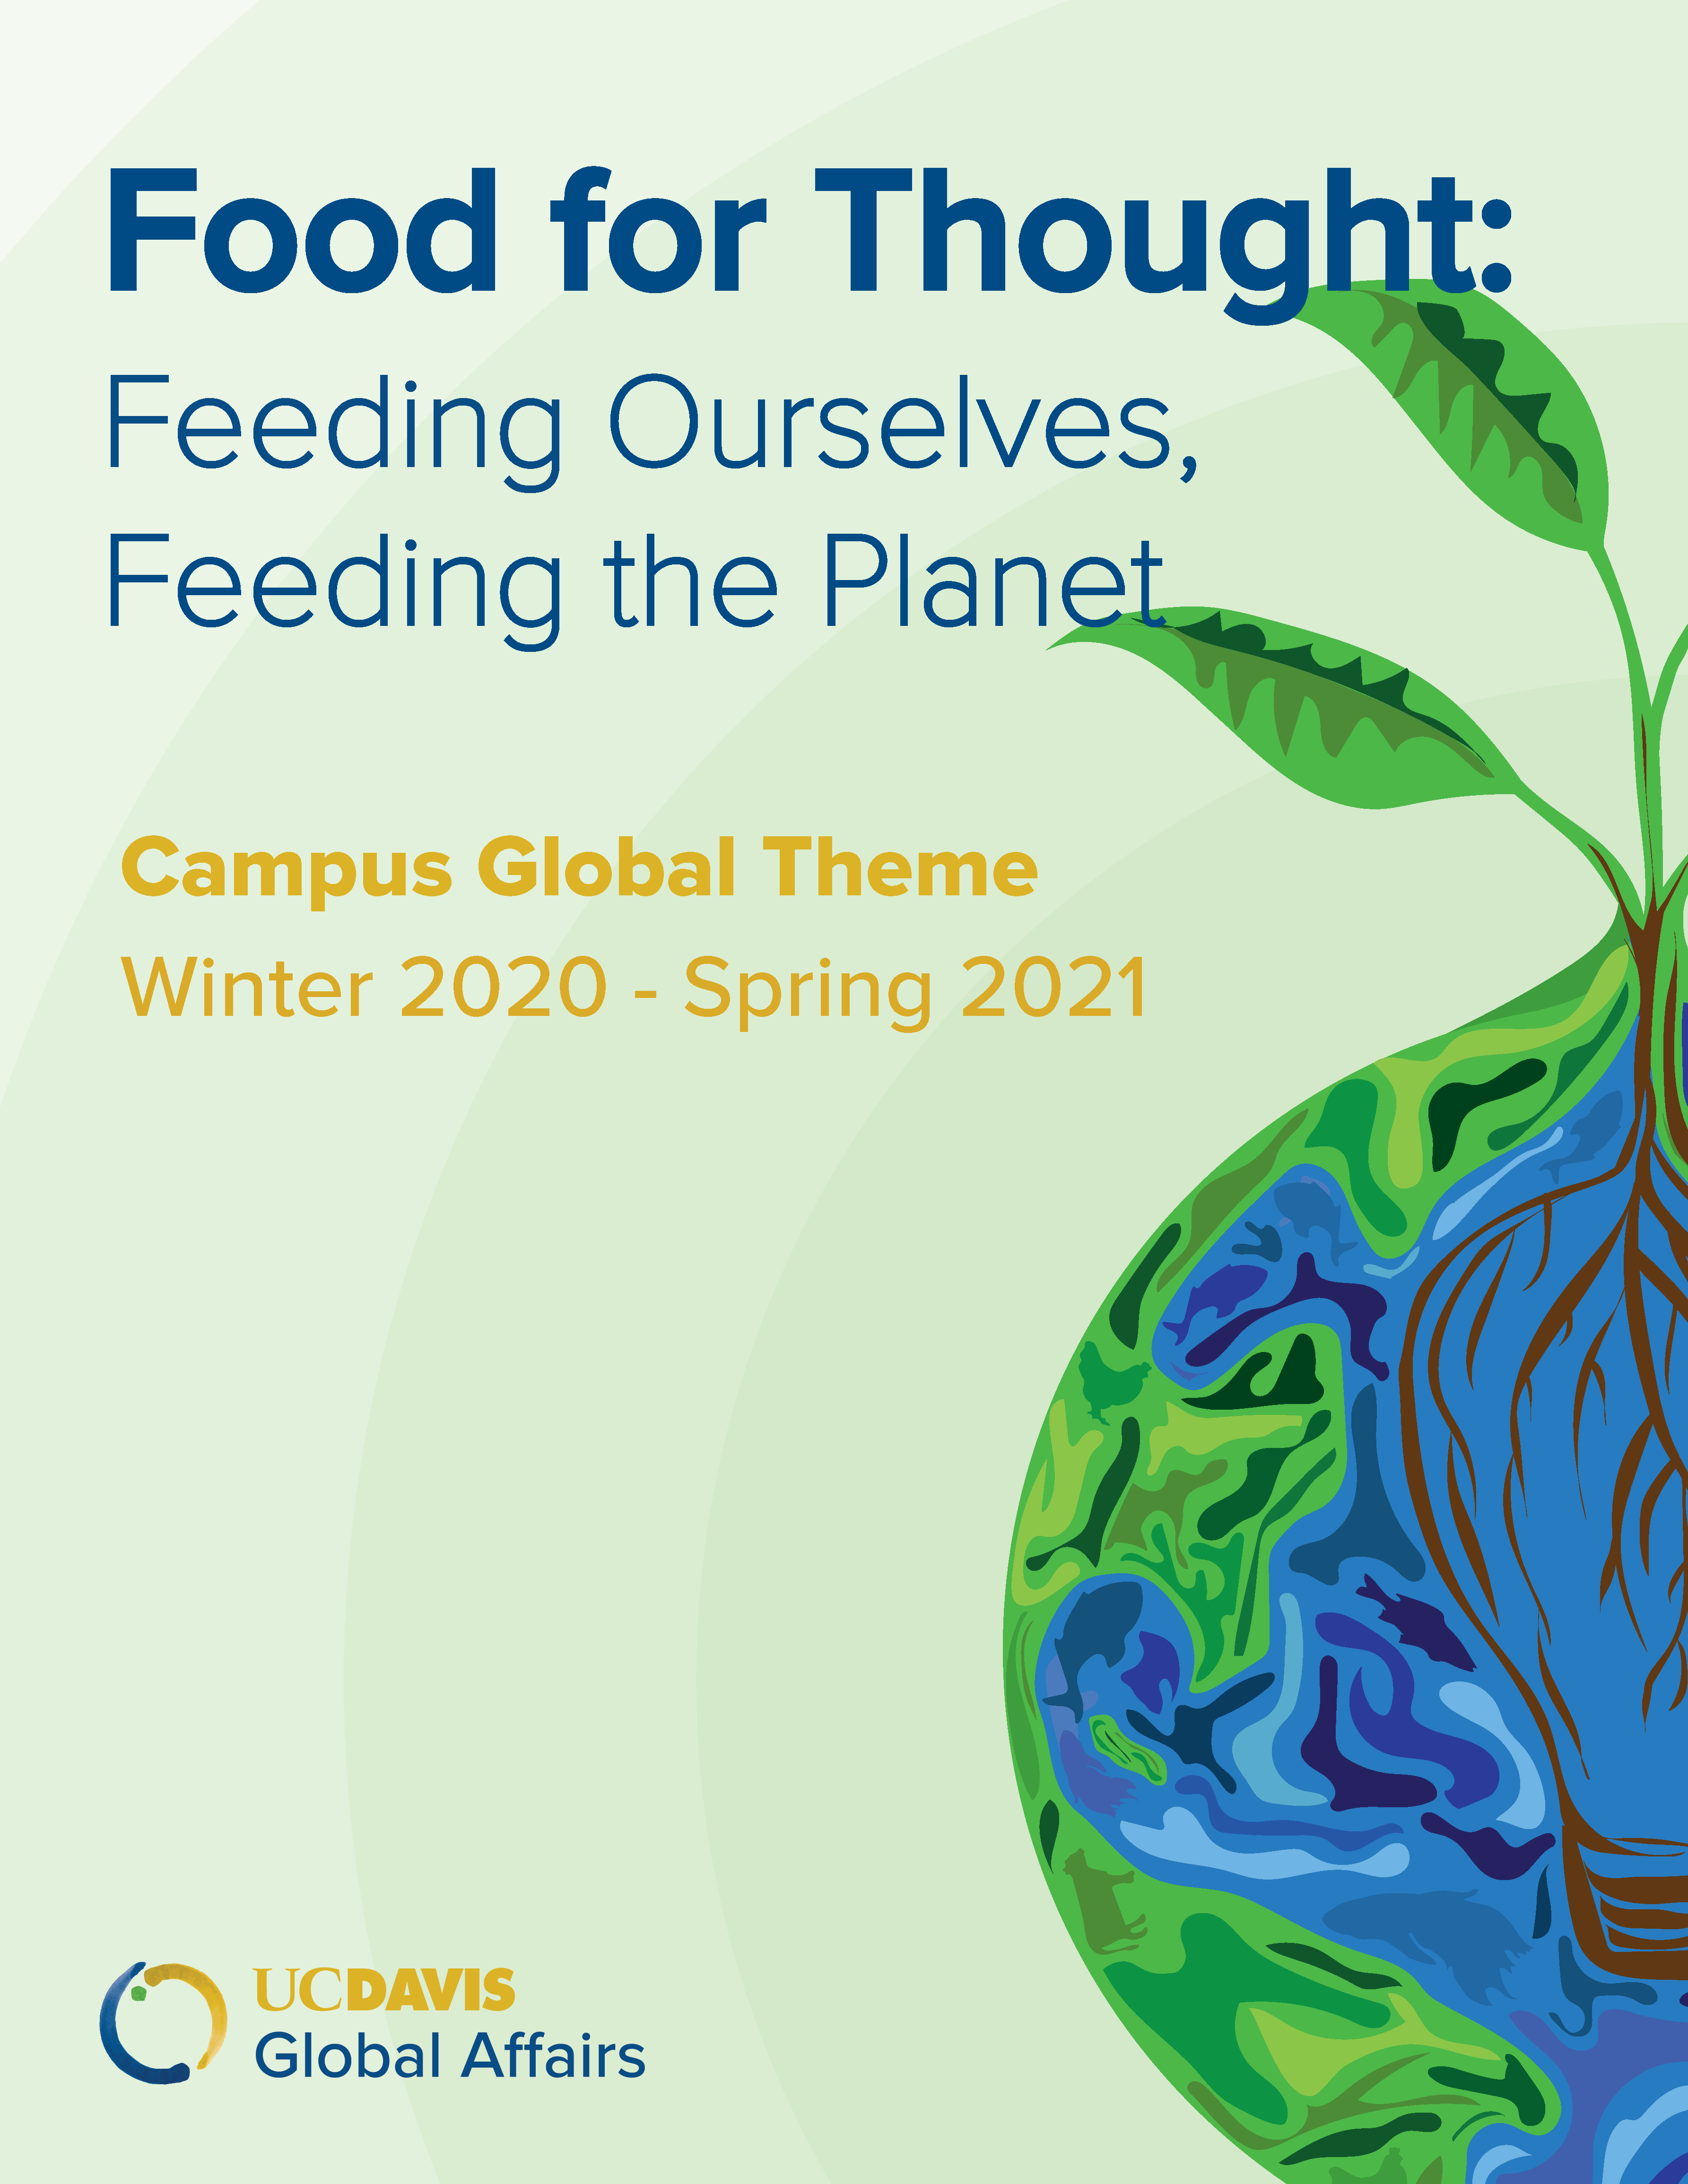 Campus Global Theme, Winter 2020-Spring 2021